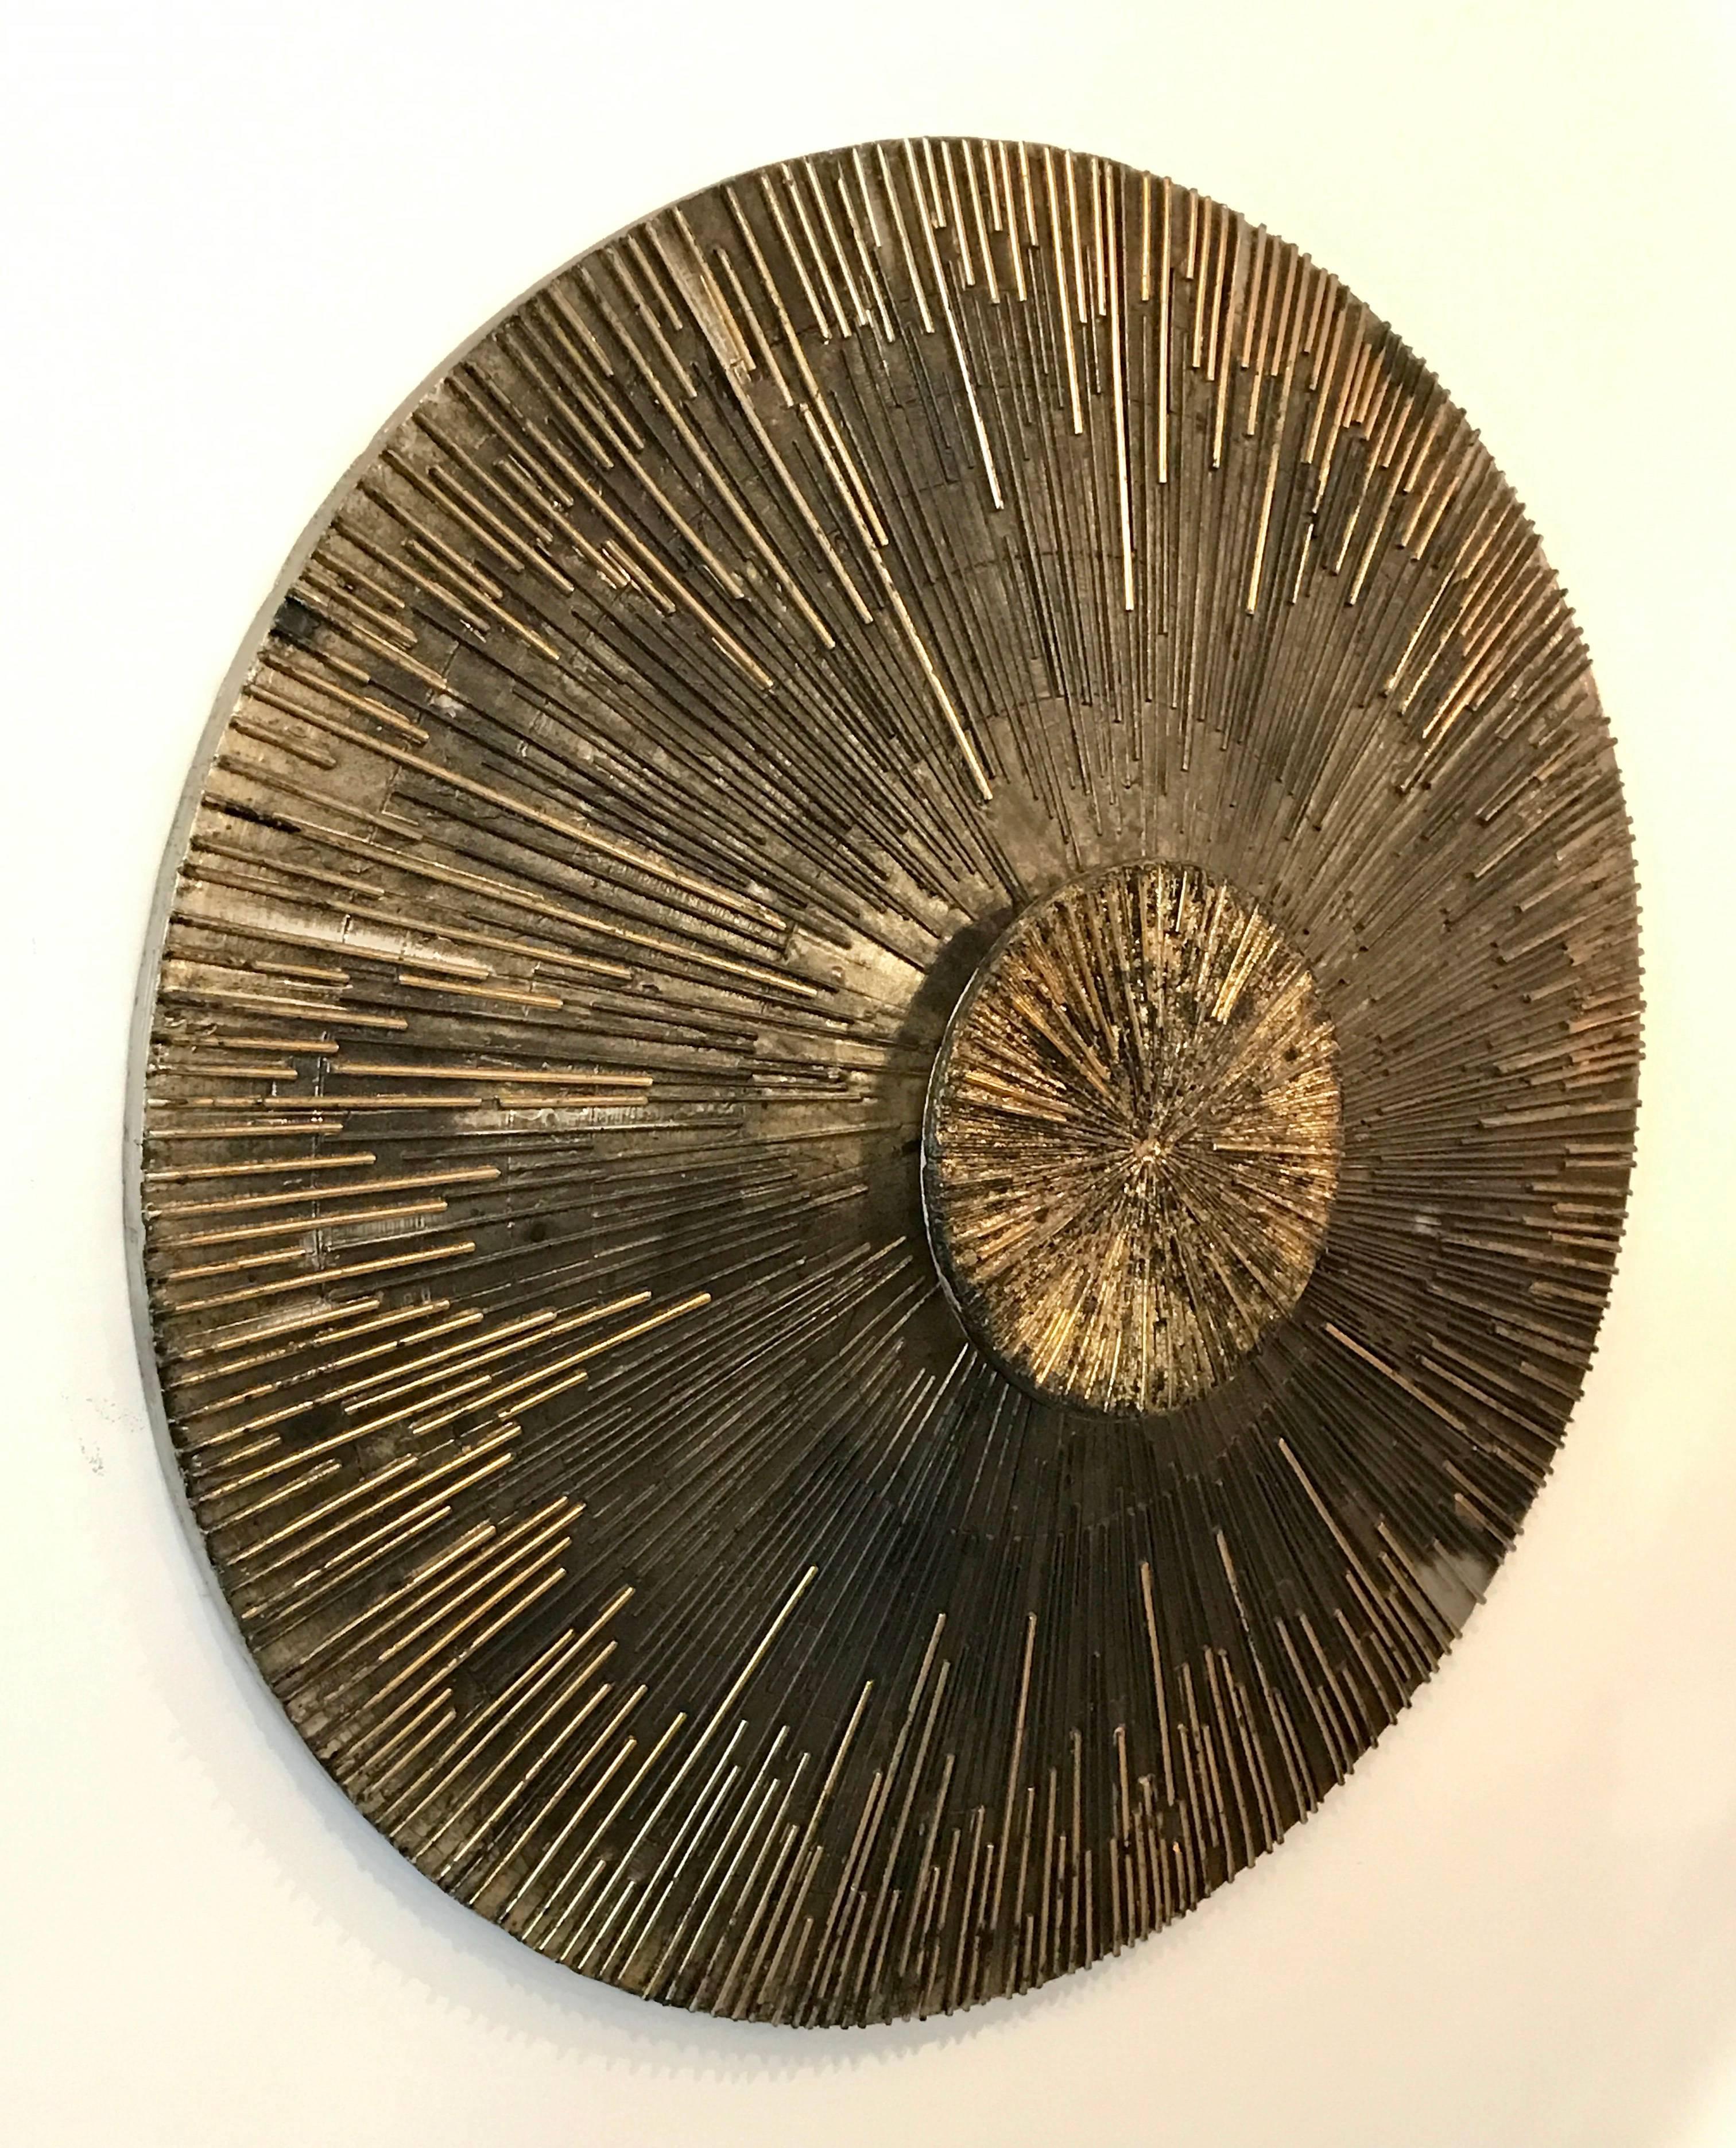 Very cool massive round brutalist wall sculpture made of fiberglass, hand painted in layered metallic, earth tone colors with bronze, silver and gold.